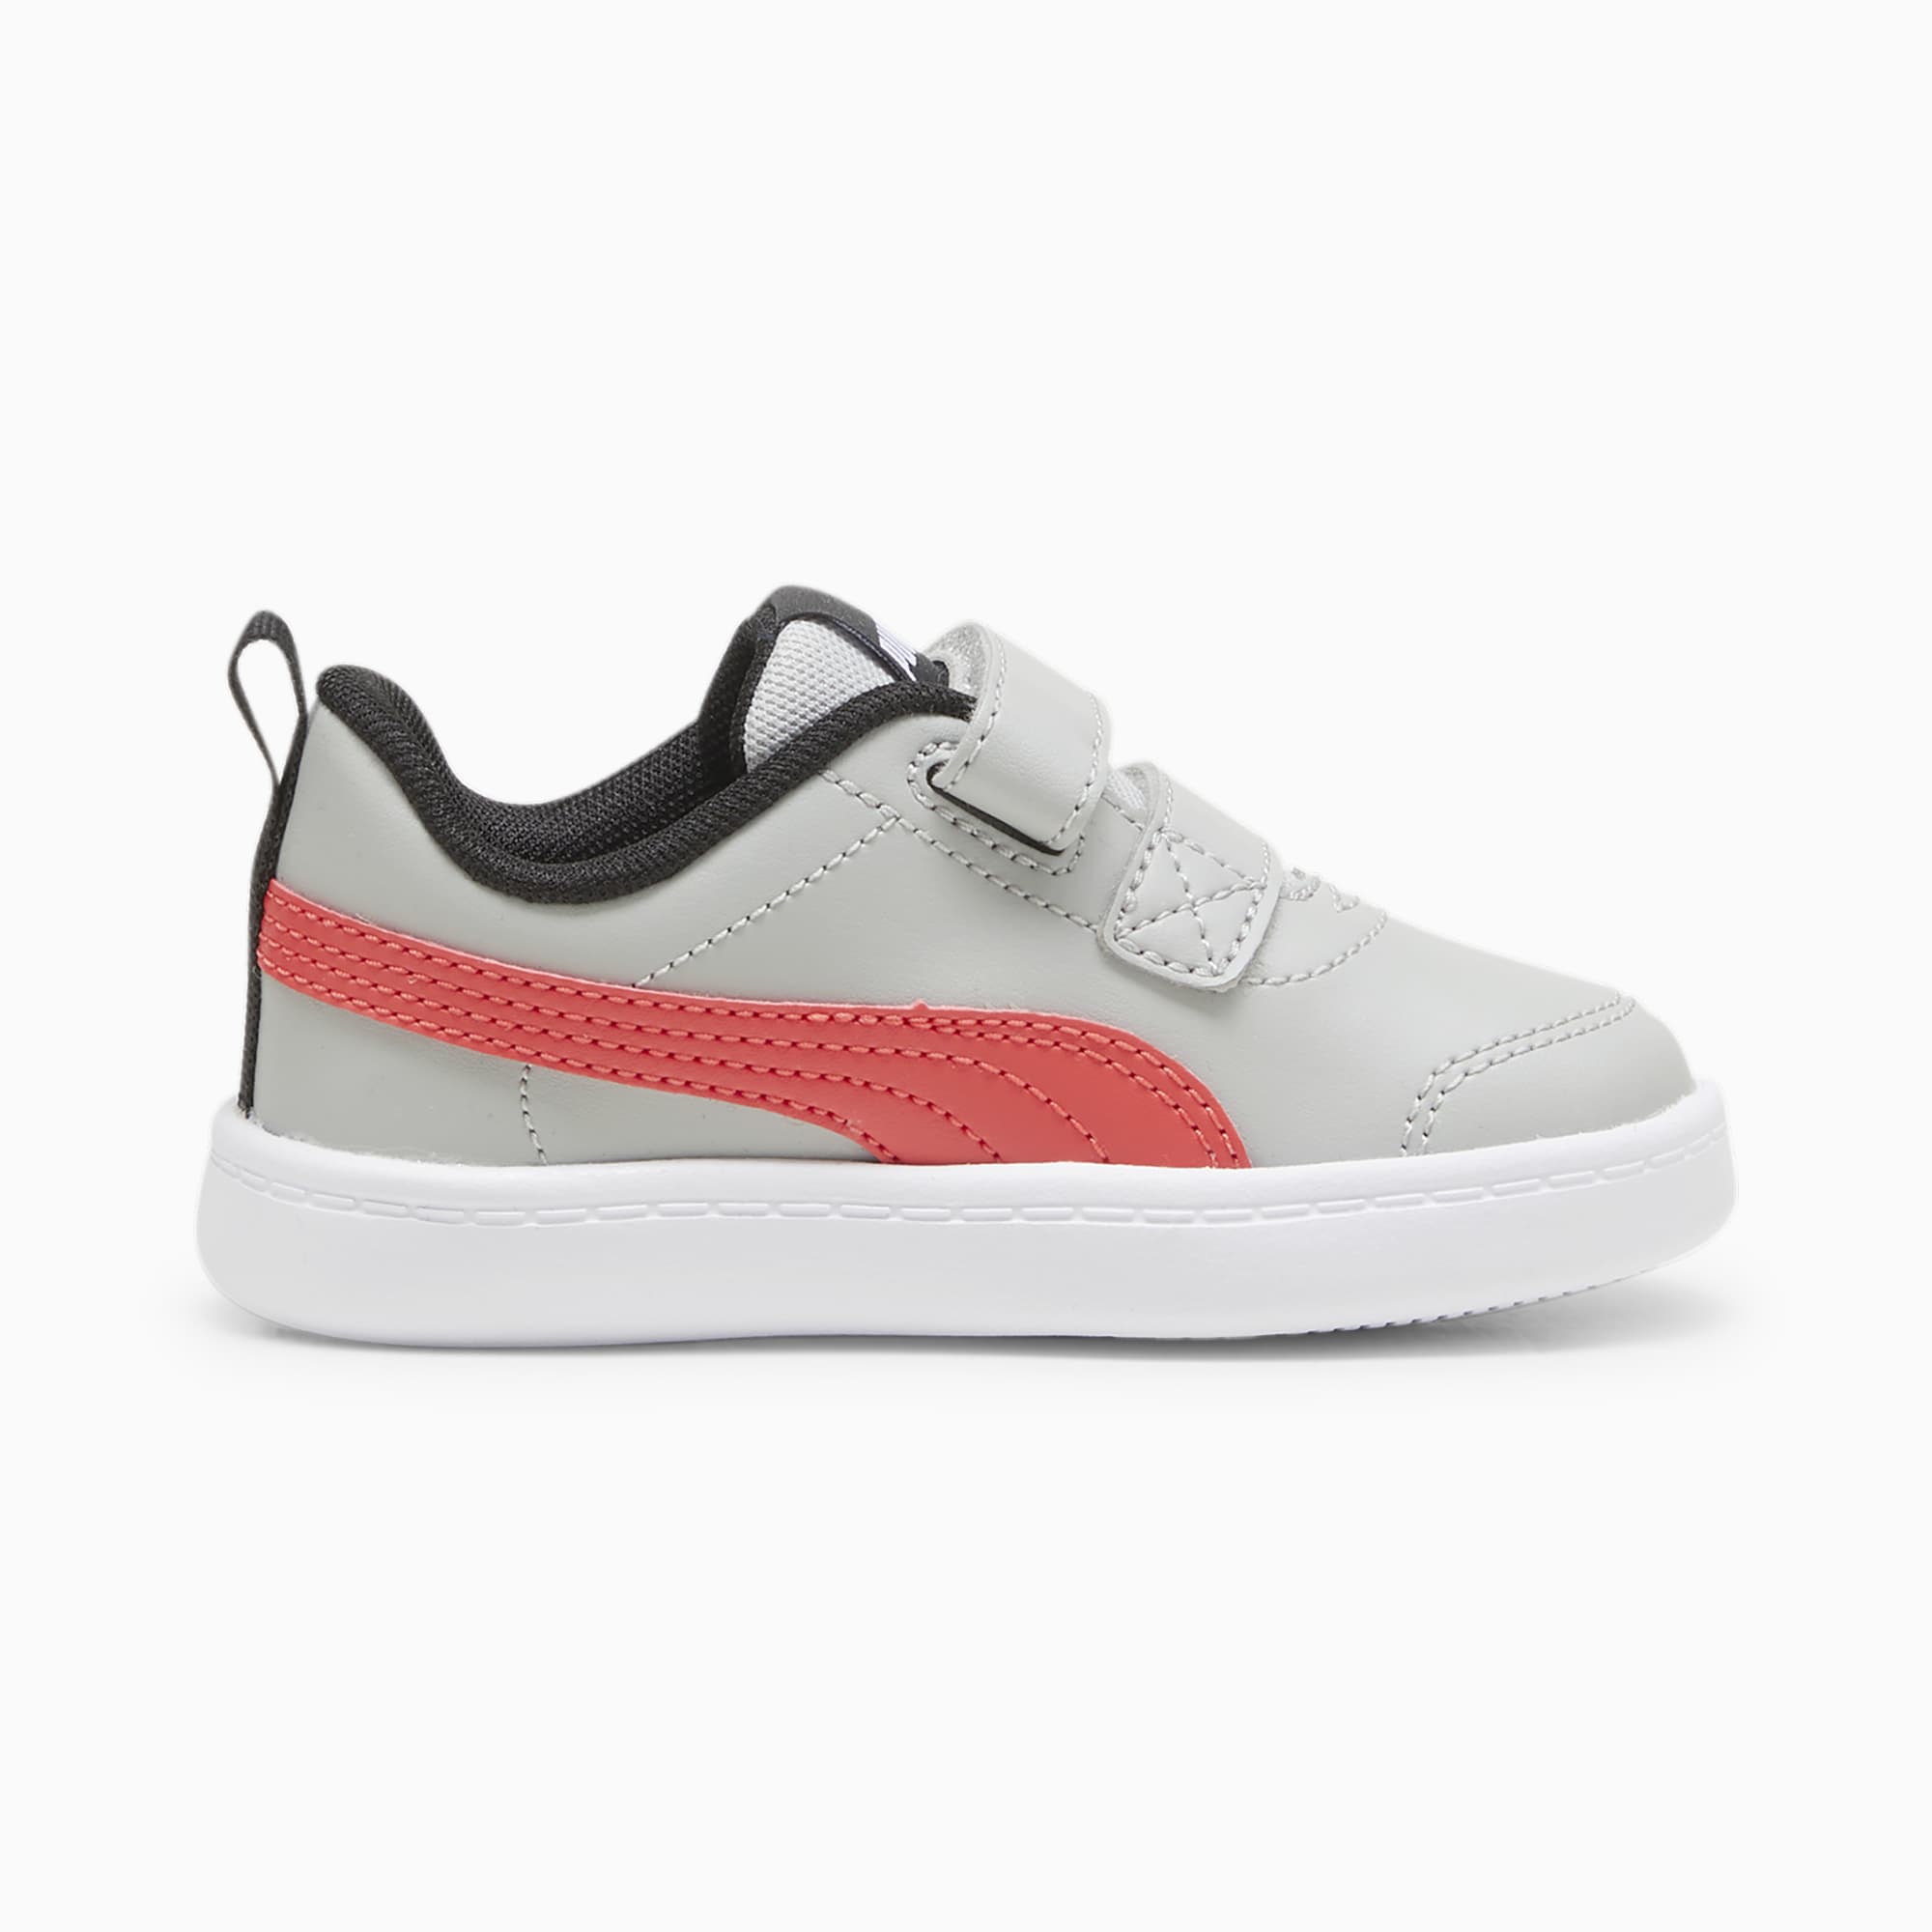 PUMA Courtflex V2 Babies' Trainers, Cool Light Grey/Active Red, Size 19, Shoes